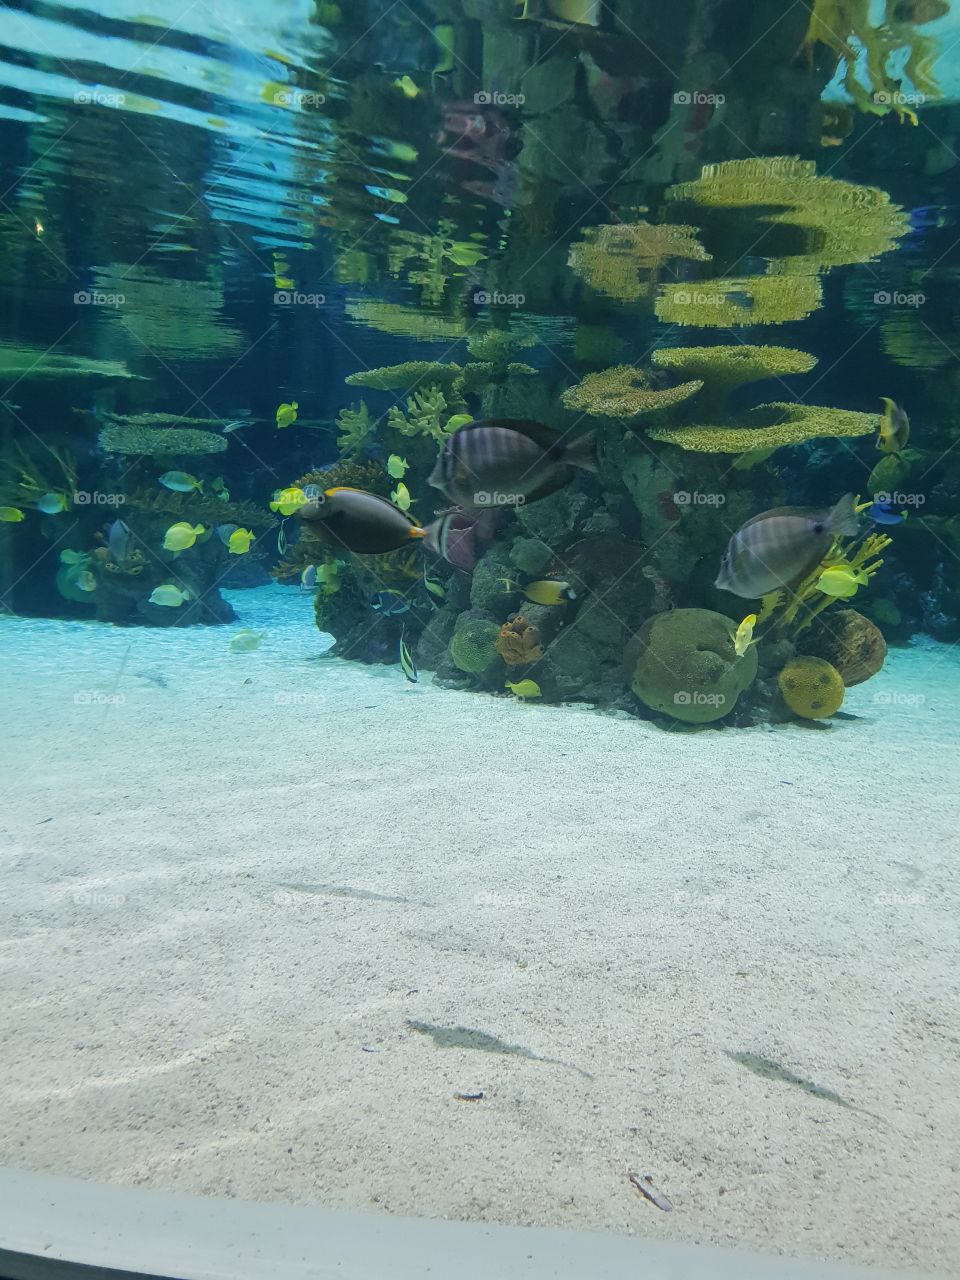 Scene of an artificial reef in an aquarium. The view is fantastic and fish can be seen around the reef.